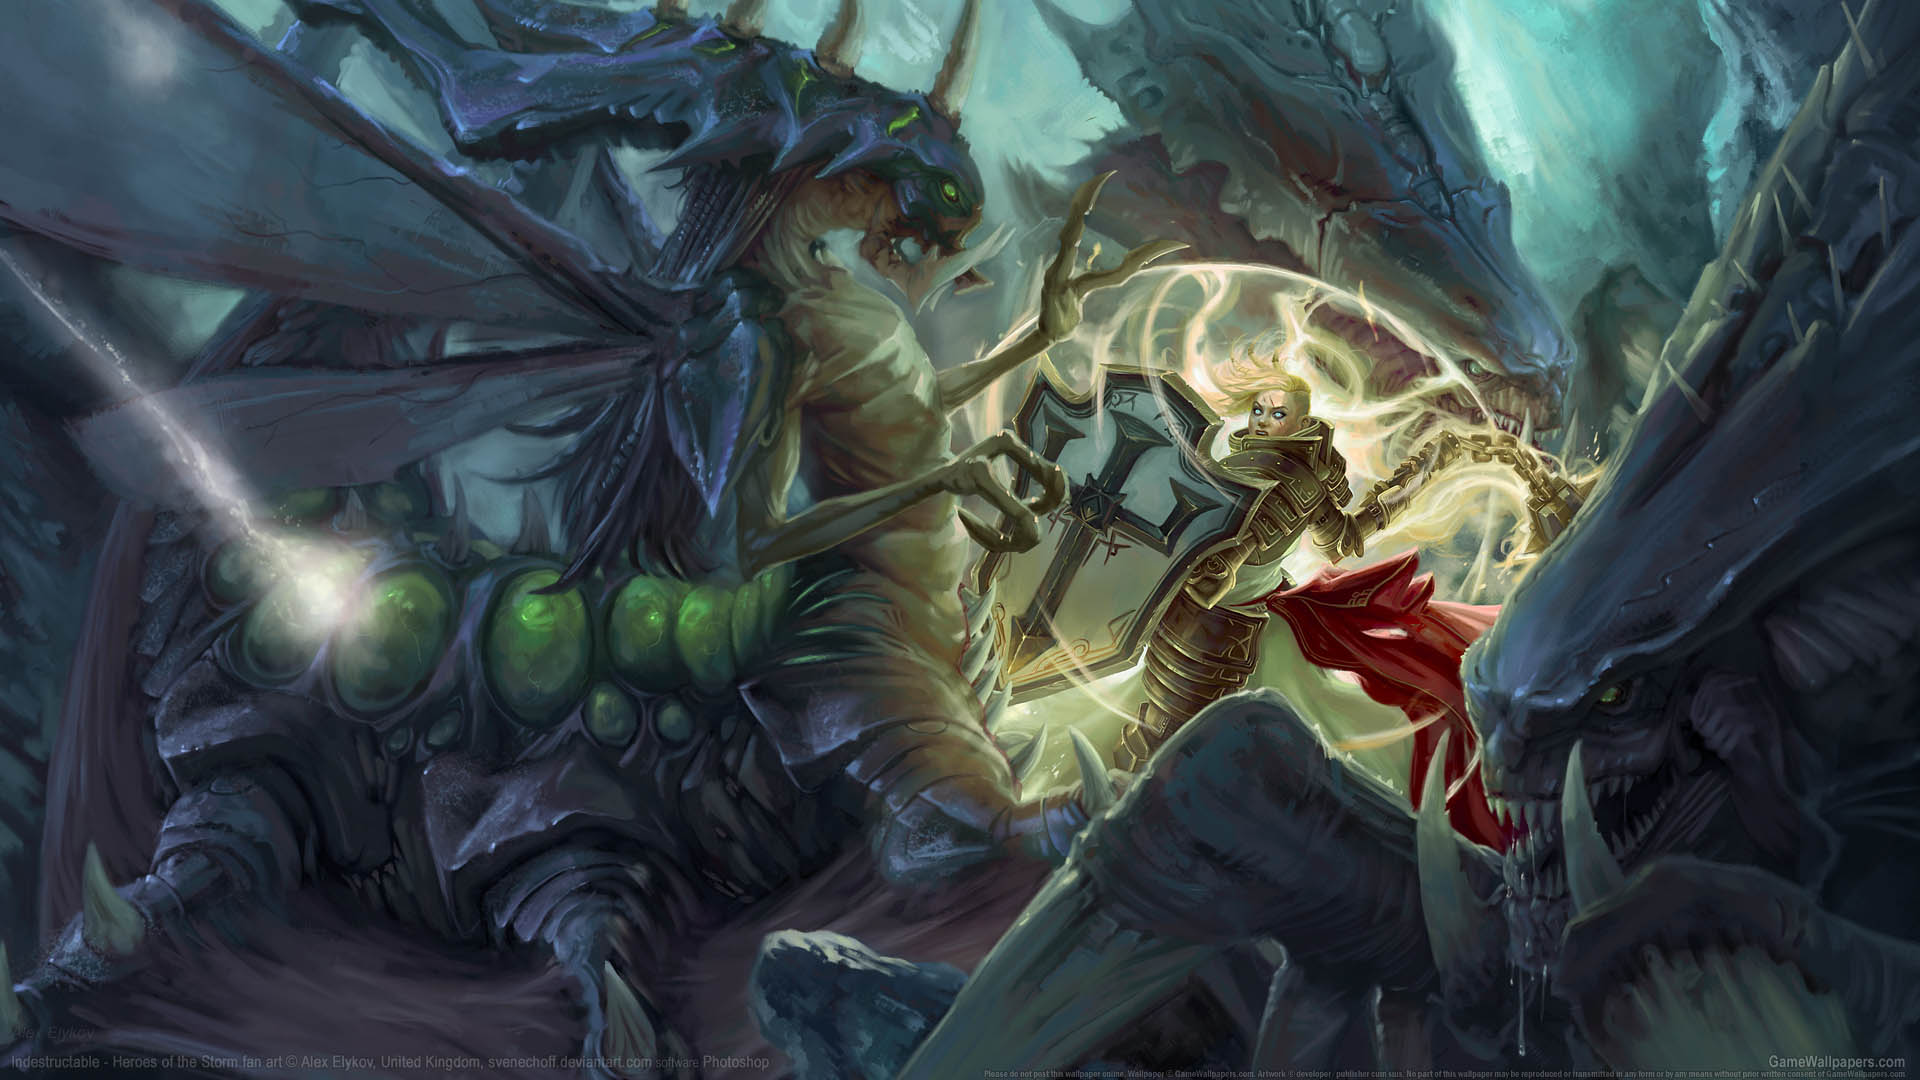 Heroes of the Storm fan art achtergrond 03 1920x1080